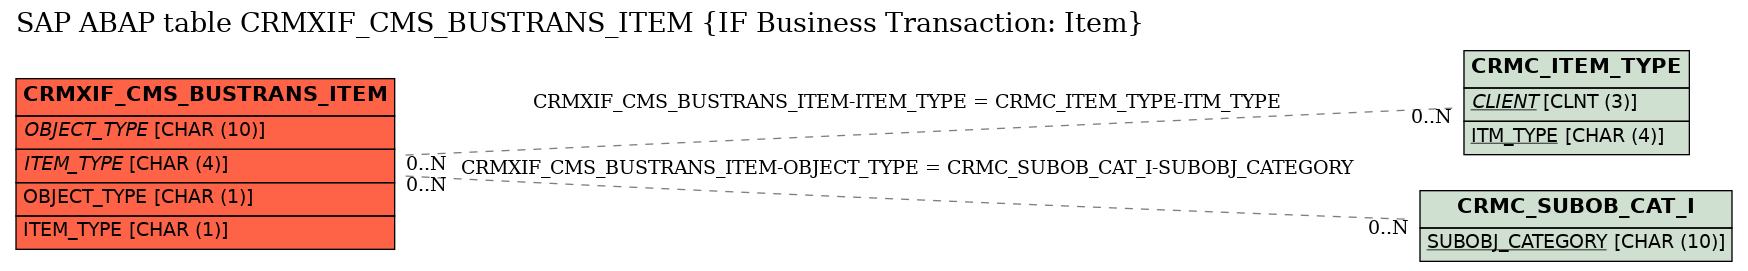 E-R Diagram for table CRMXIF_CMS_BUSTRANS_ITEM (IF Business Transaction: Item)